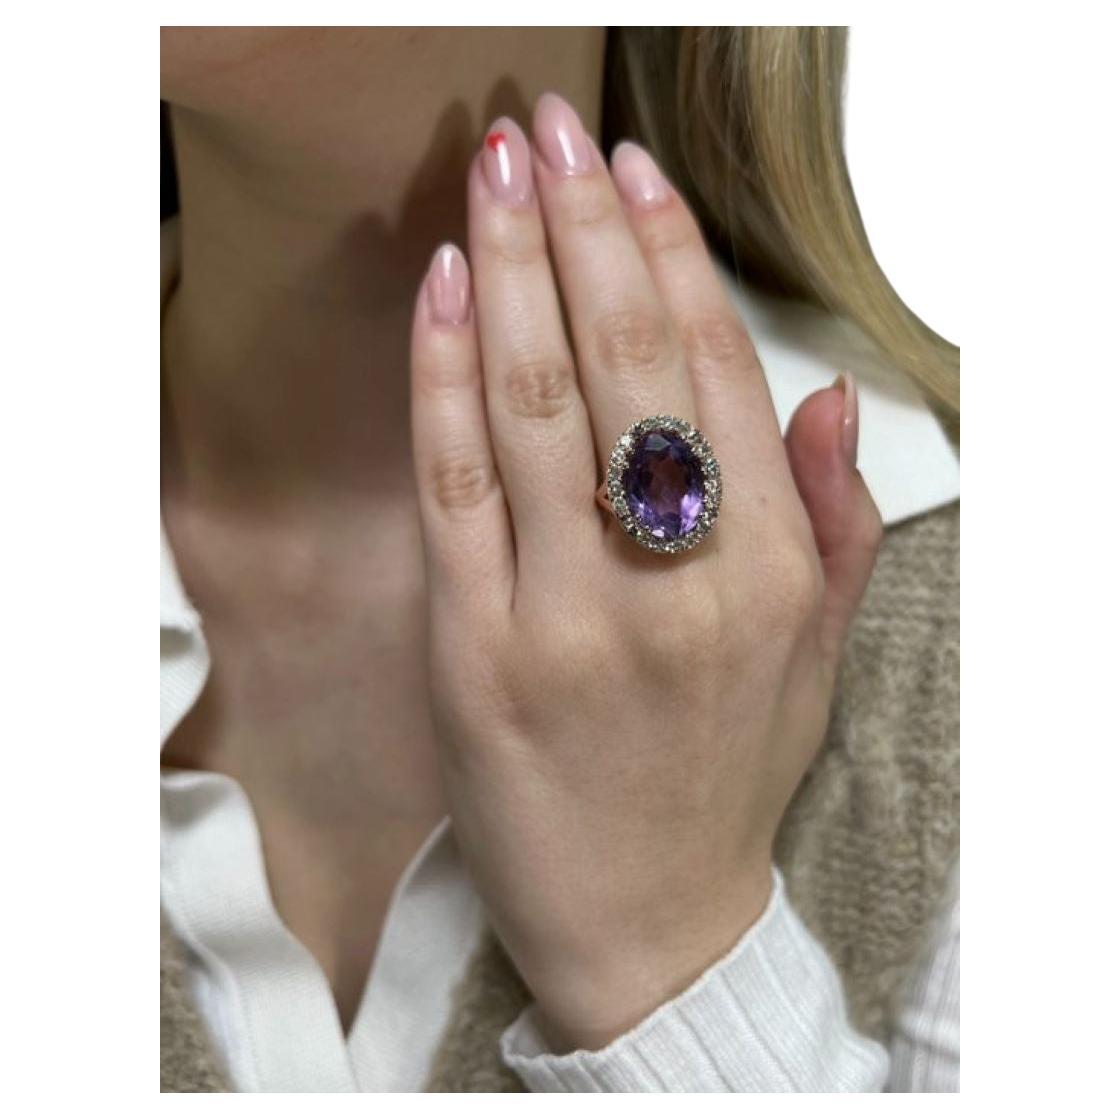 Captivating 8.58 Carat Oval Mixed Cut Amethyst Ring For Sale